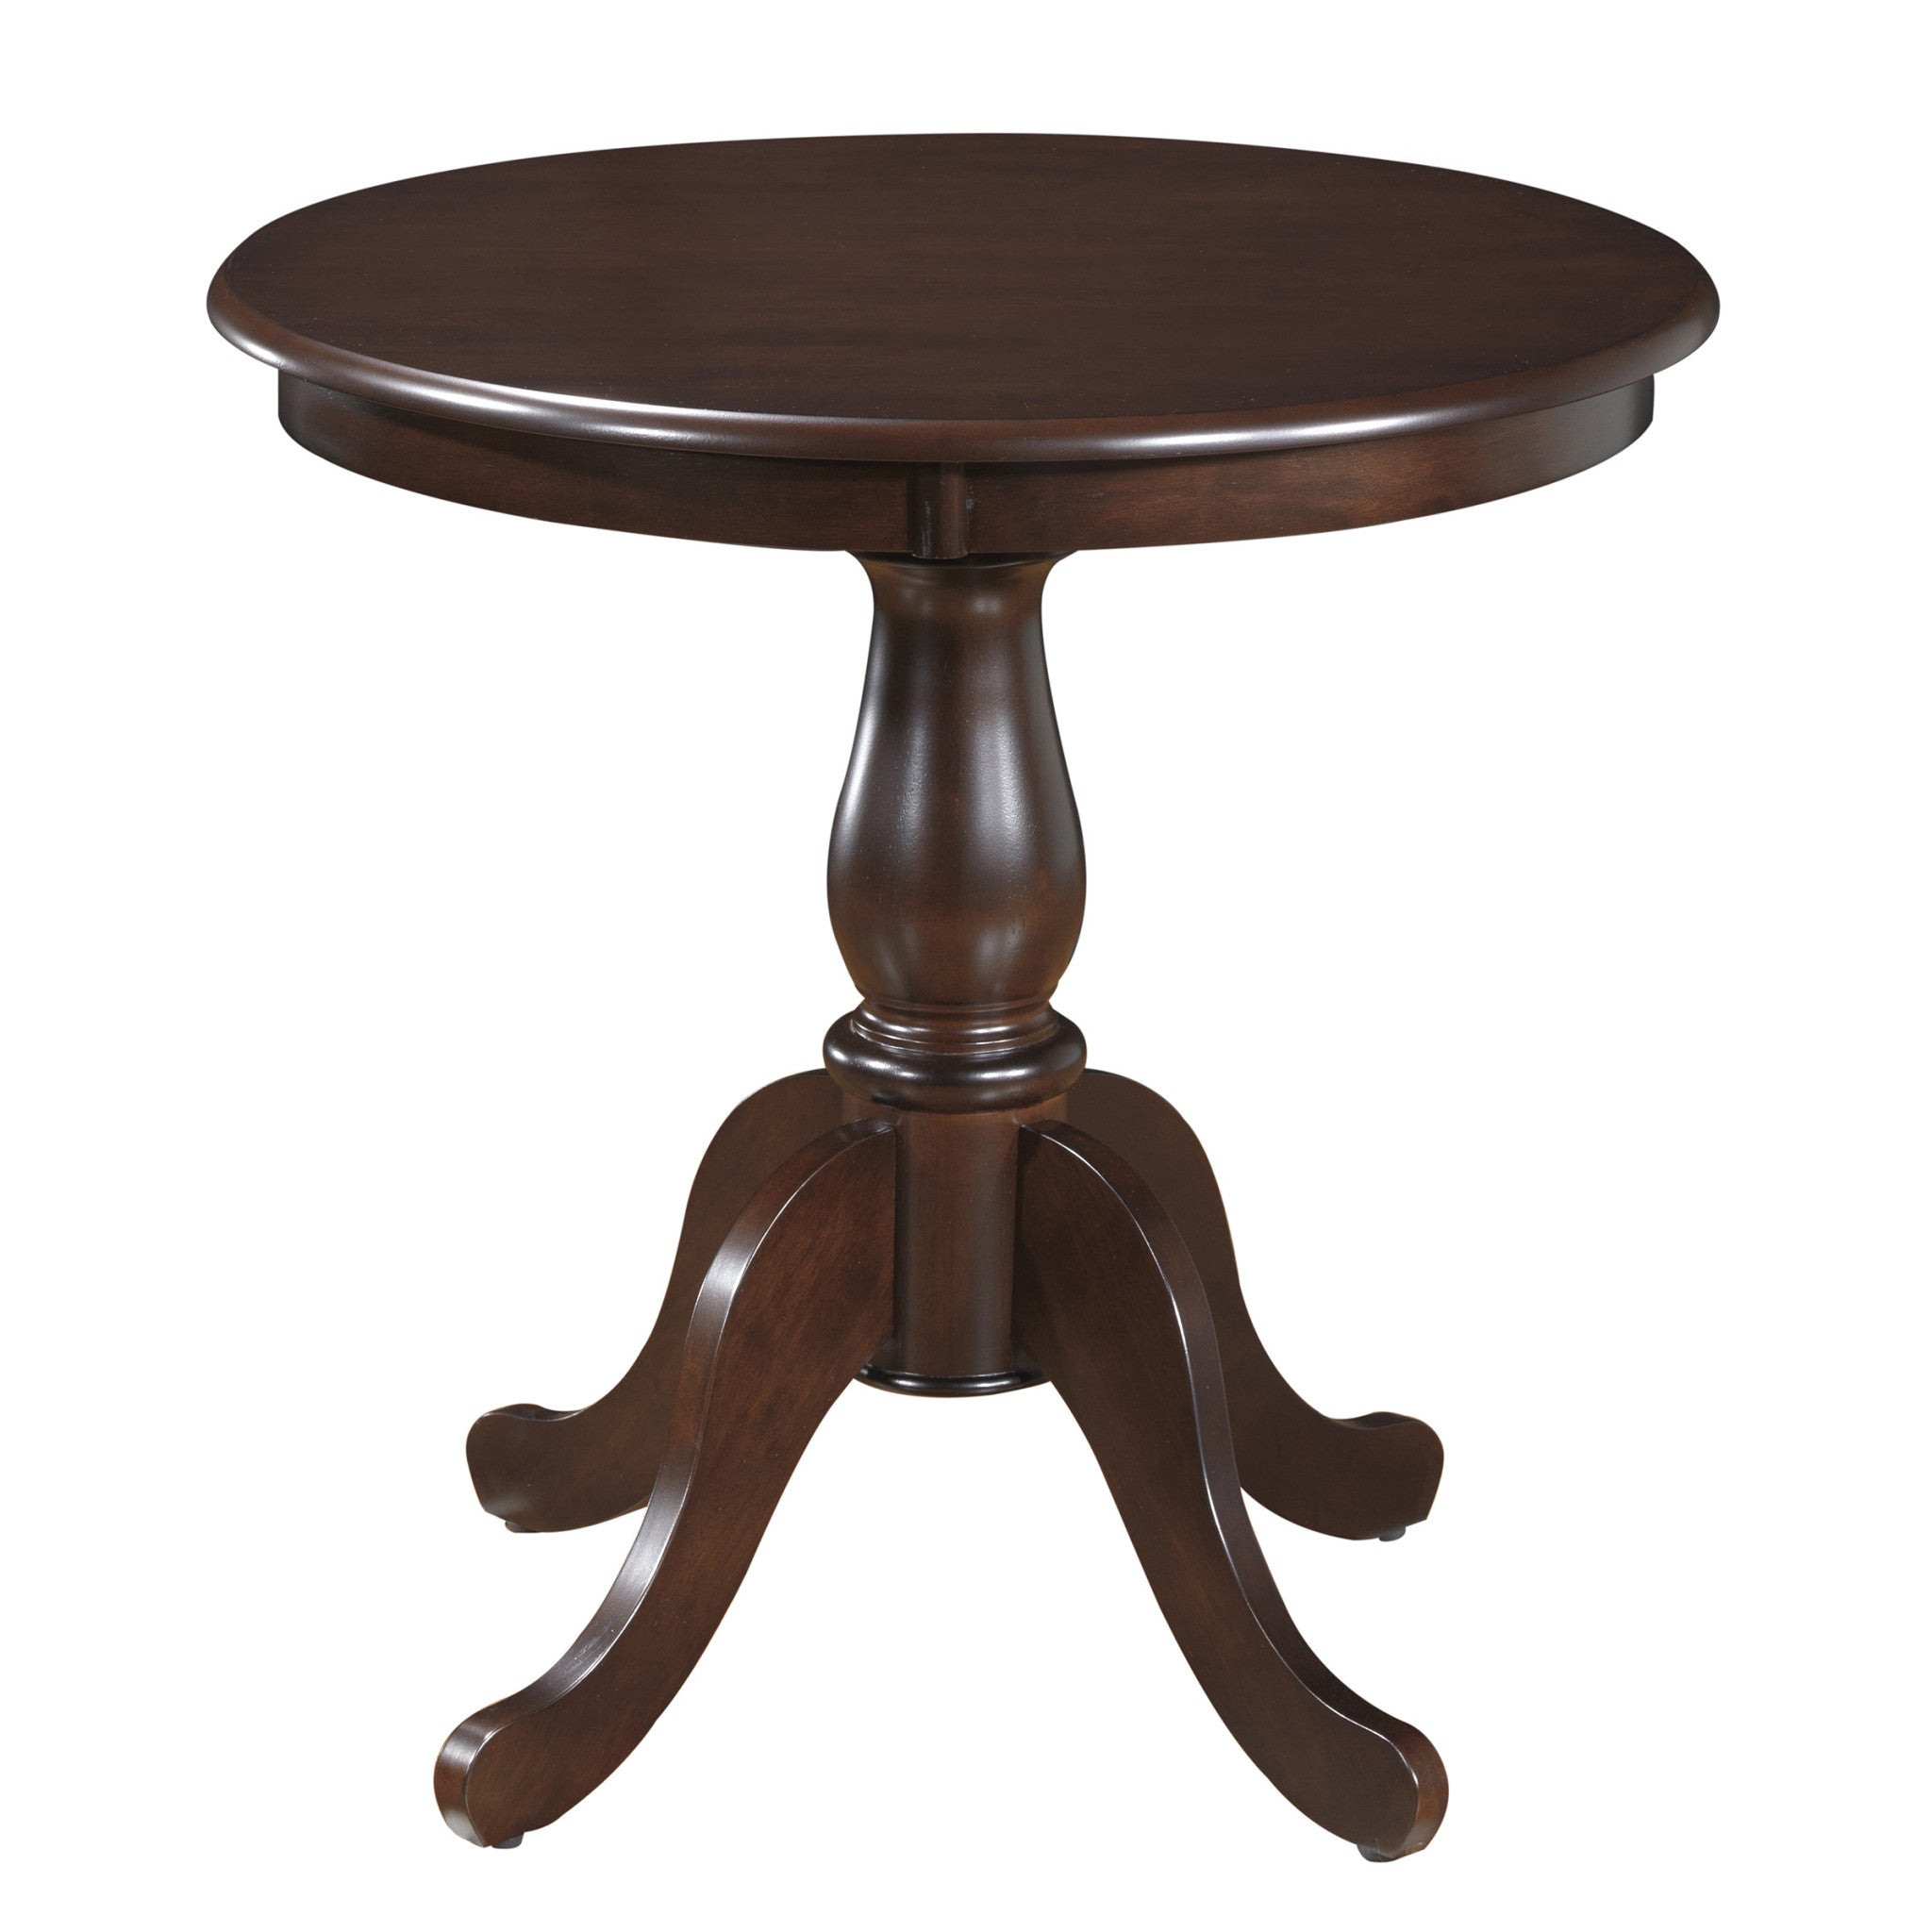 30" Espresso Rounded Solid Manufactured Wood And Solid Wood Pedestal Base Dining Table